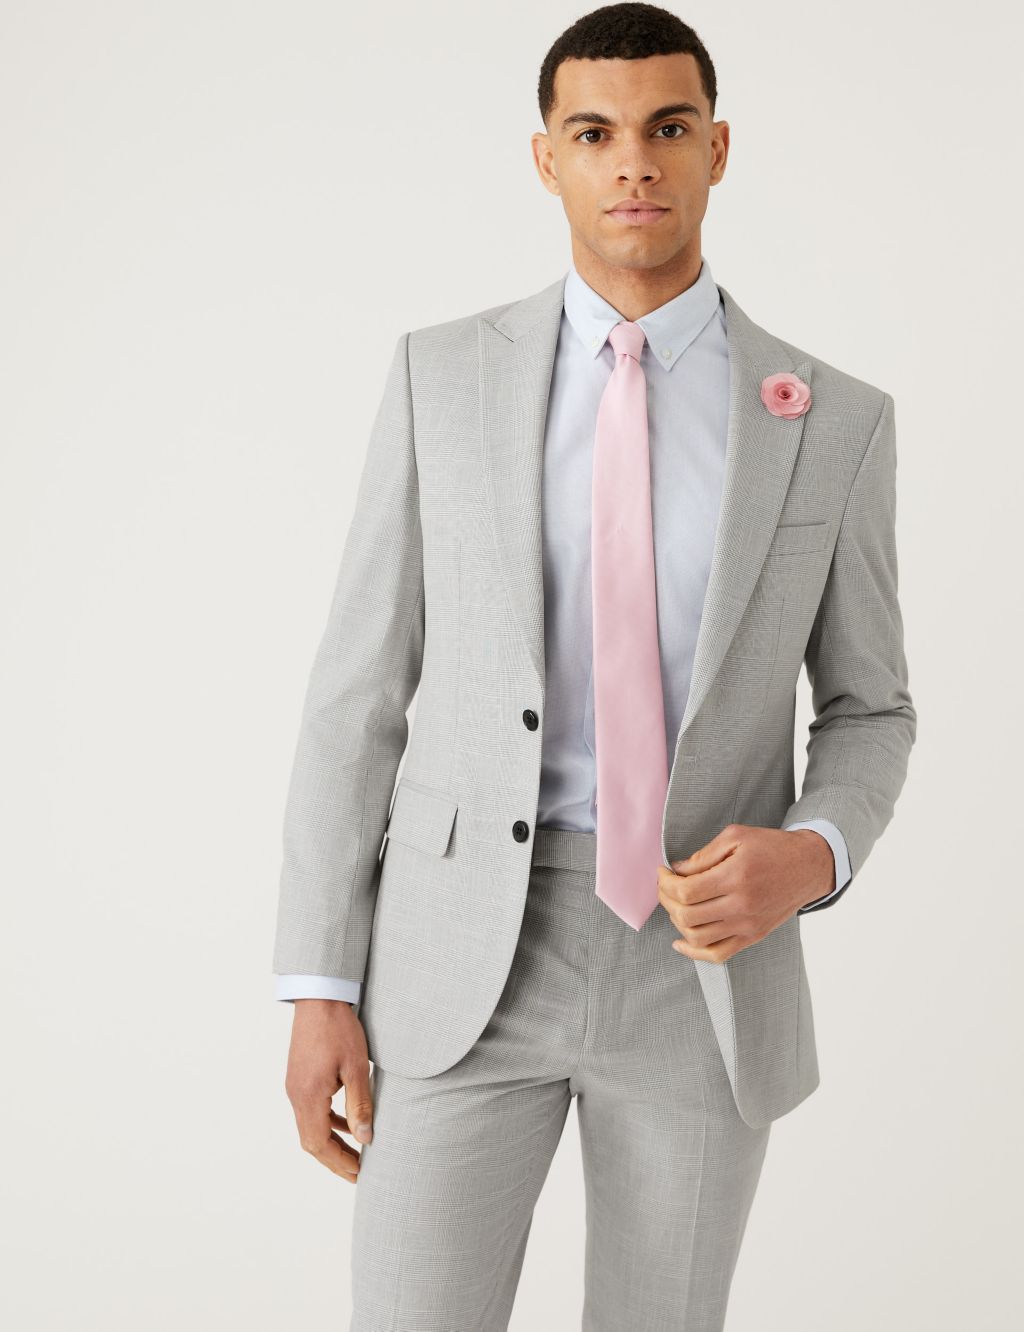 Slim Fit Prince Of Wales Check Suit image 2